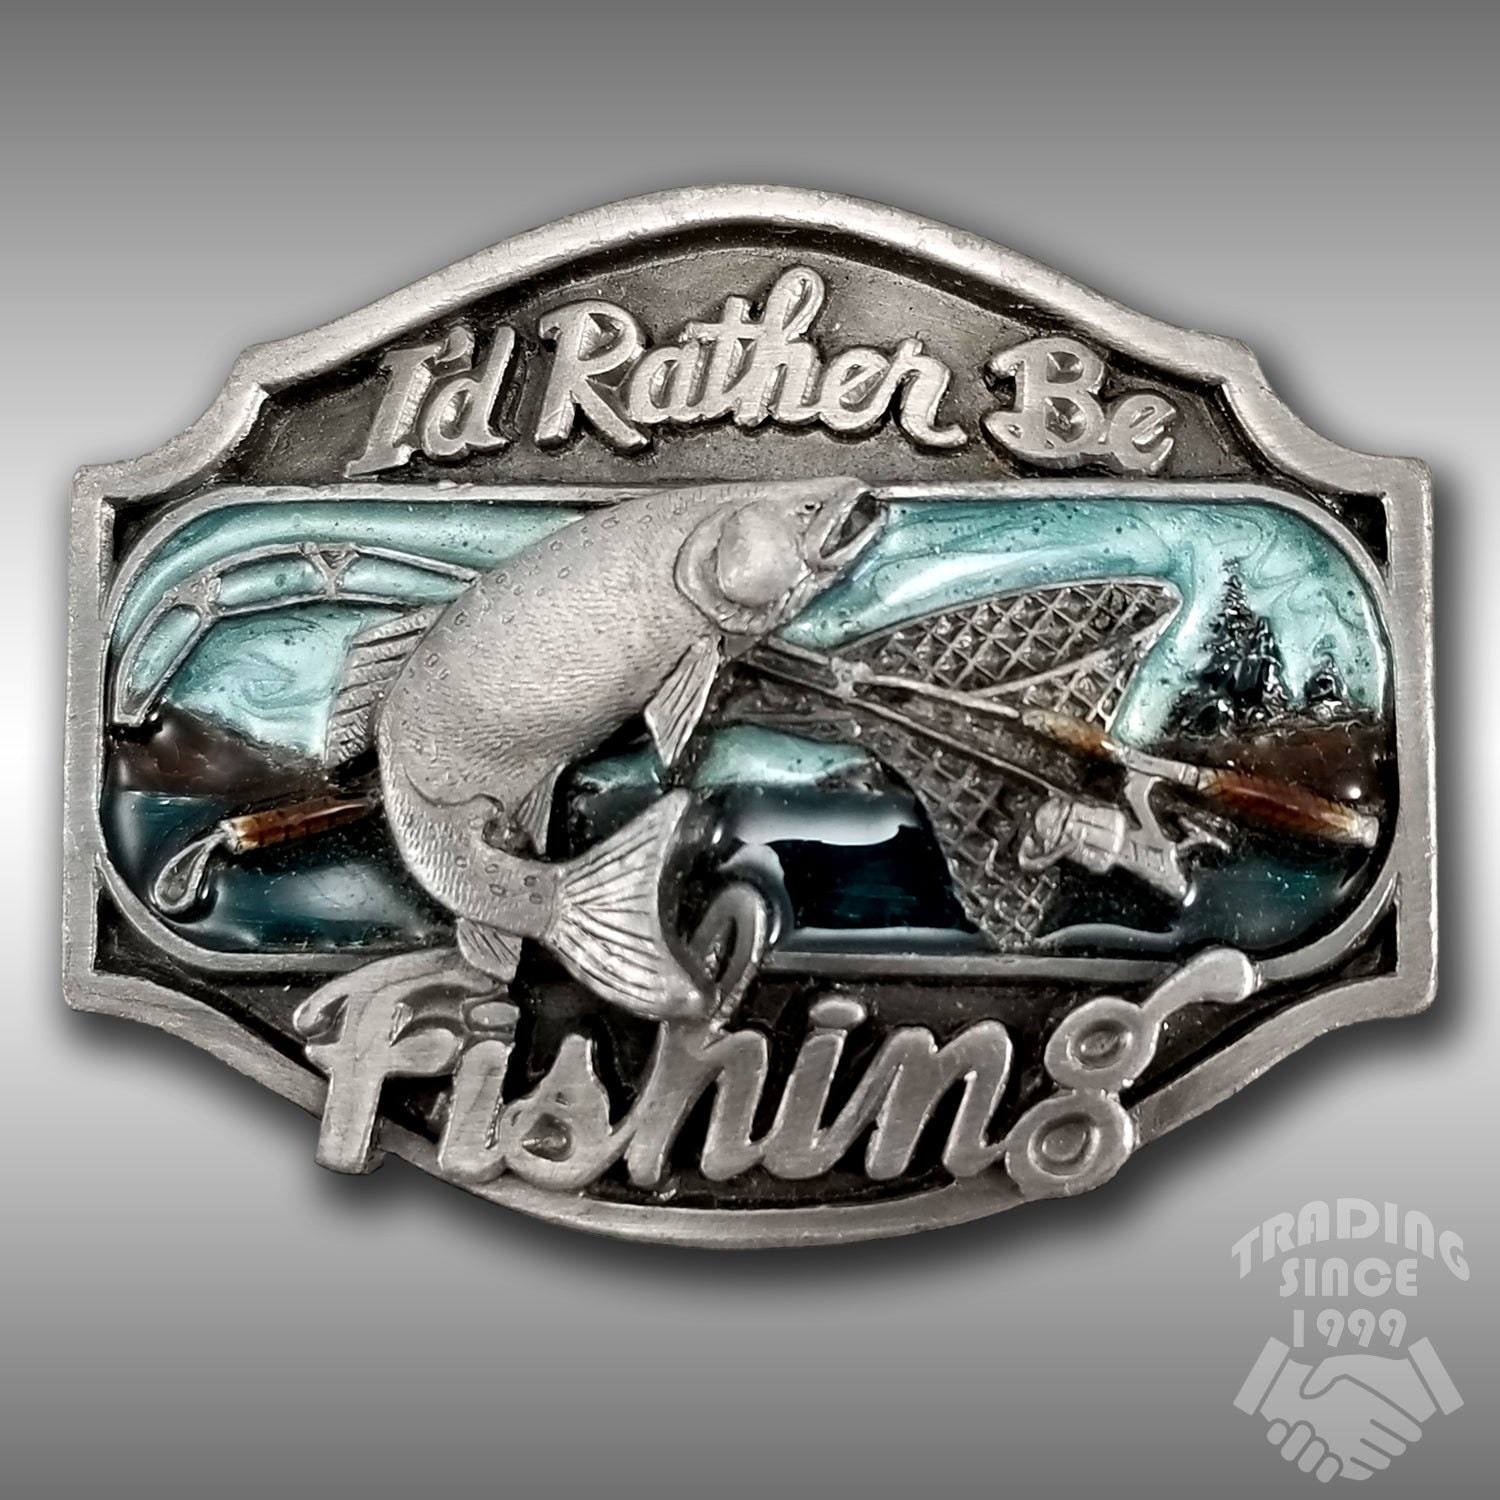 Vintage Belt Buckle 1989 I'd Rather Be Fishing Fish Embossed Made In The  USA By Arroyo Grande Co.